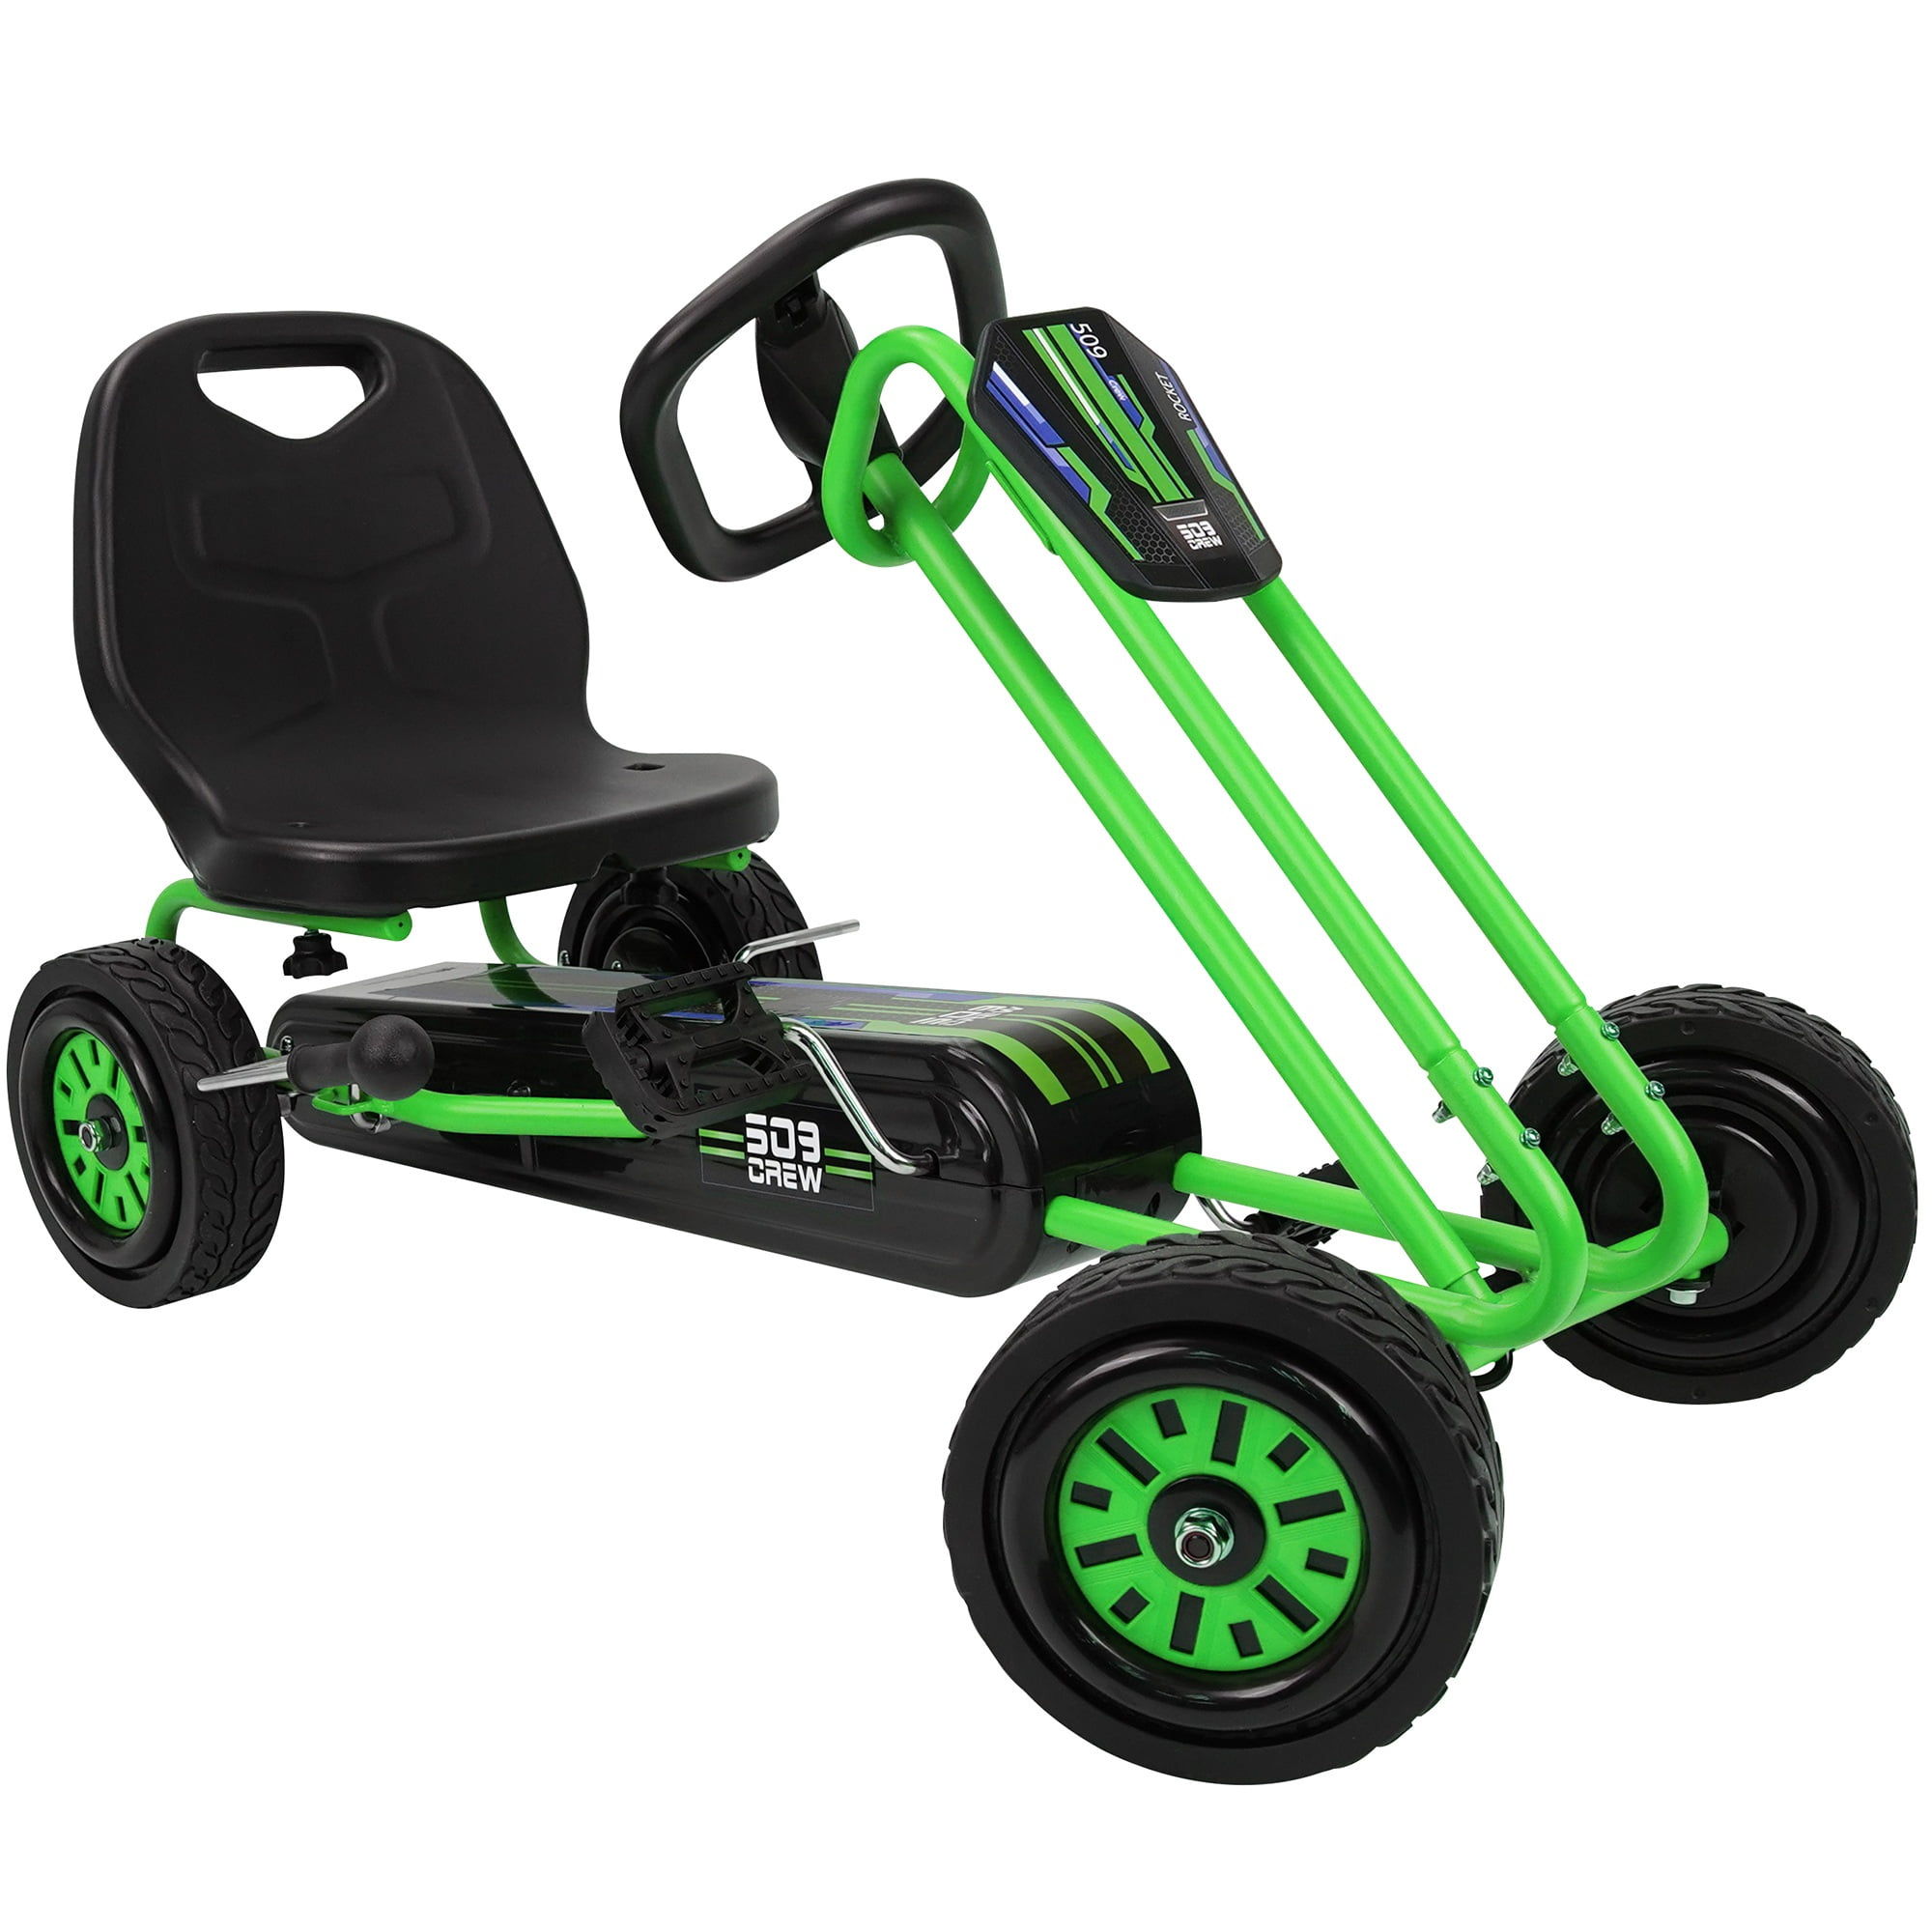 509: Rocket Pedal Green Go Kart - Ride on Toy for Boys & Girls With  Ergonomic Adjustable Seat & Sharp Handling, Ages 4+ 